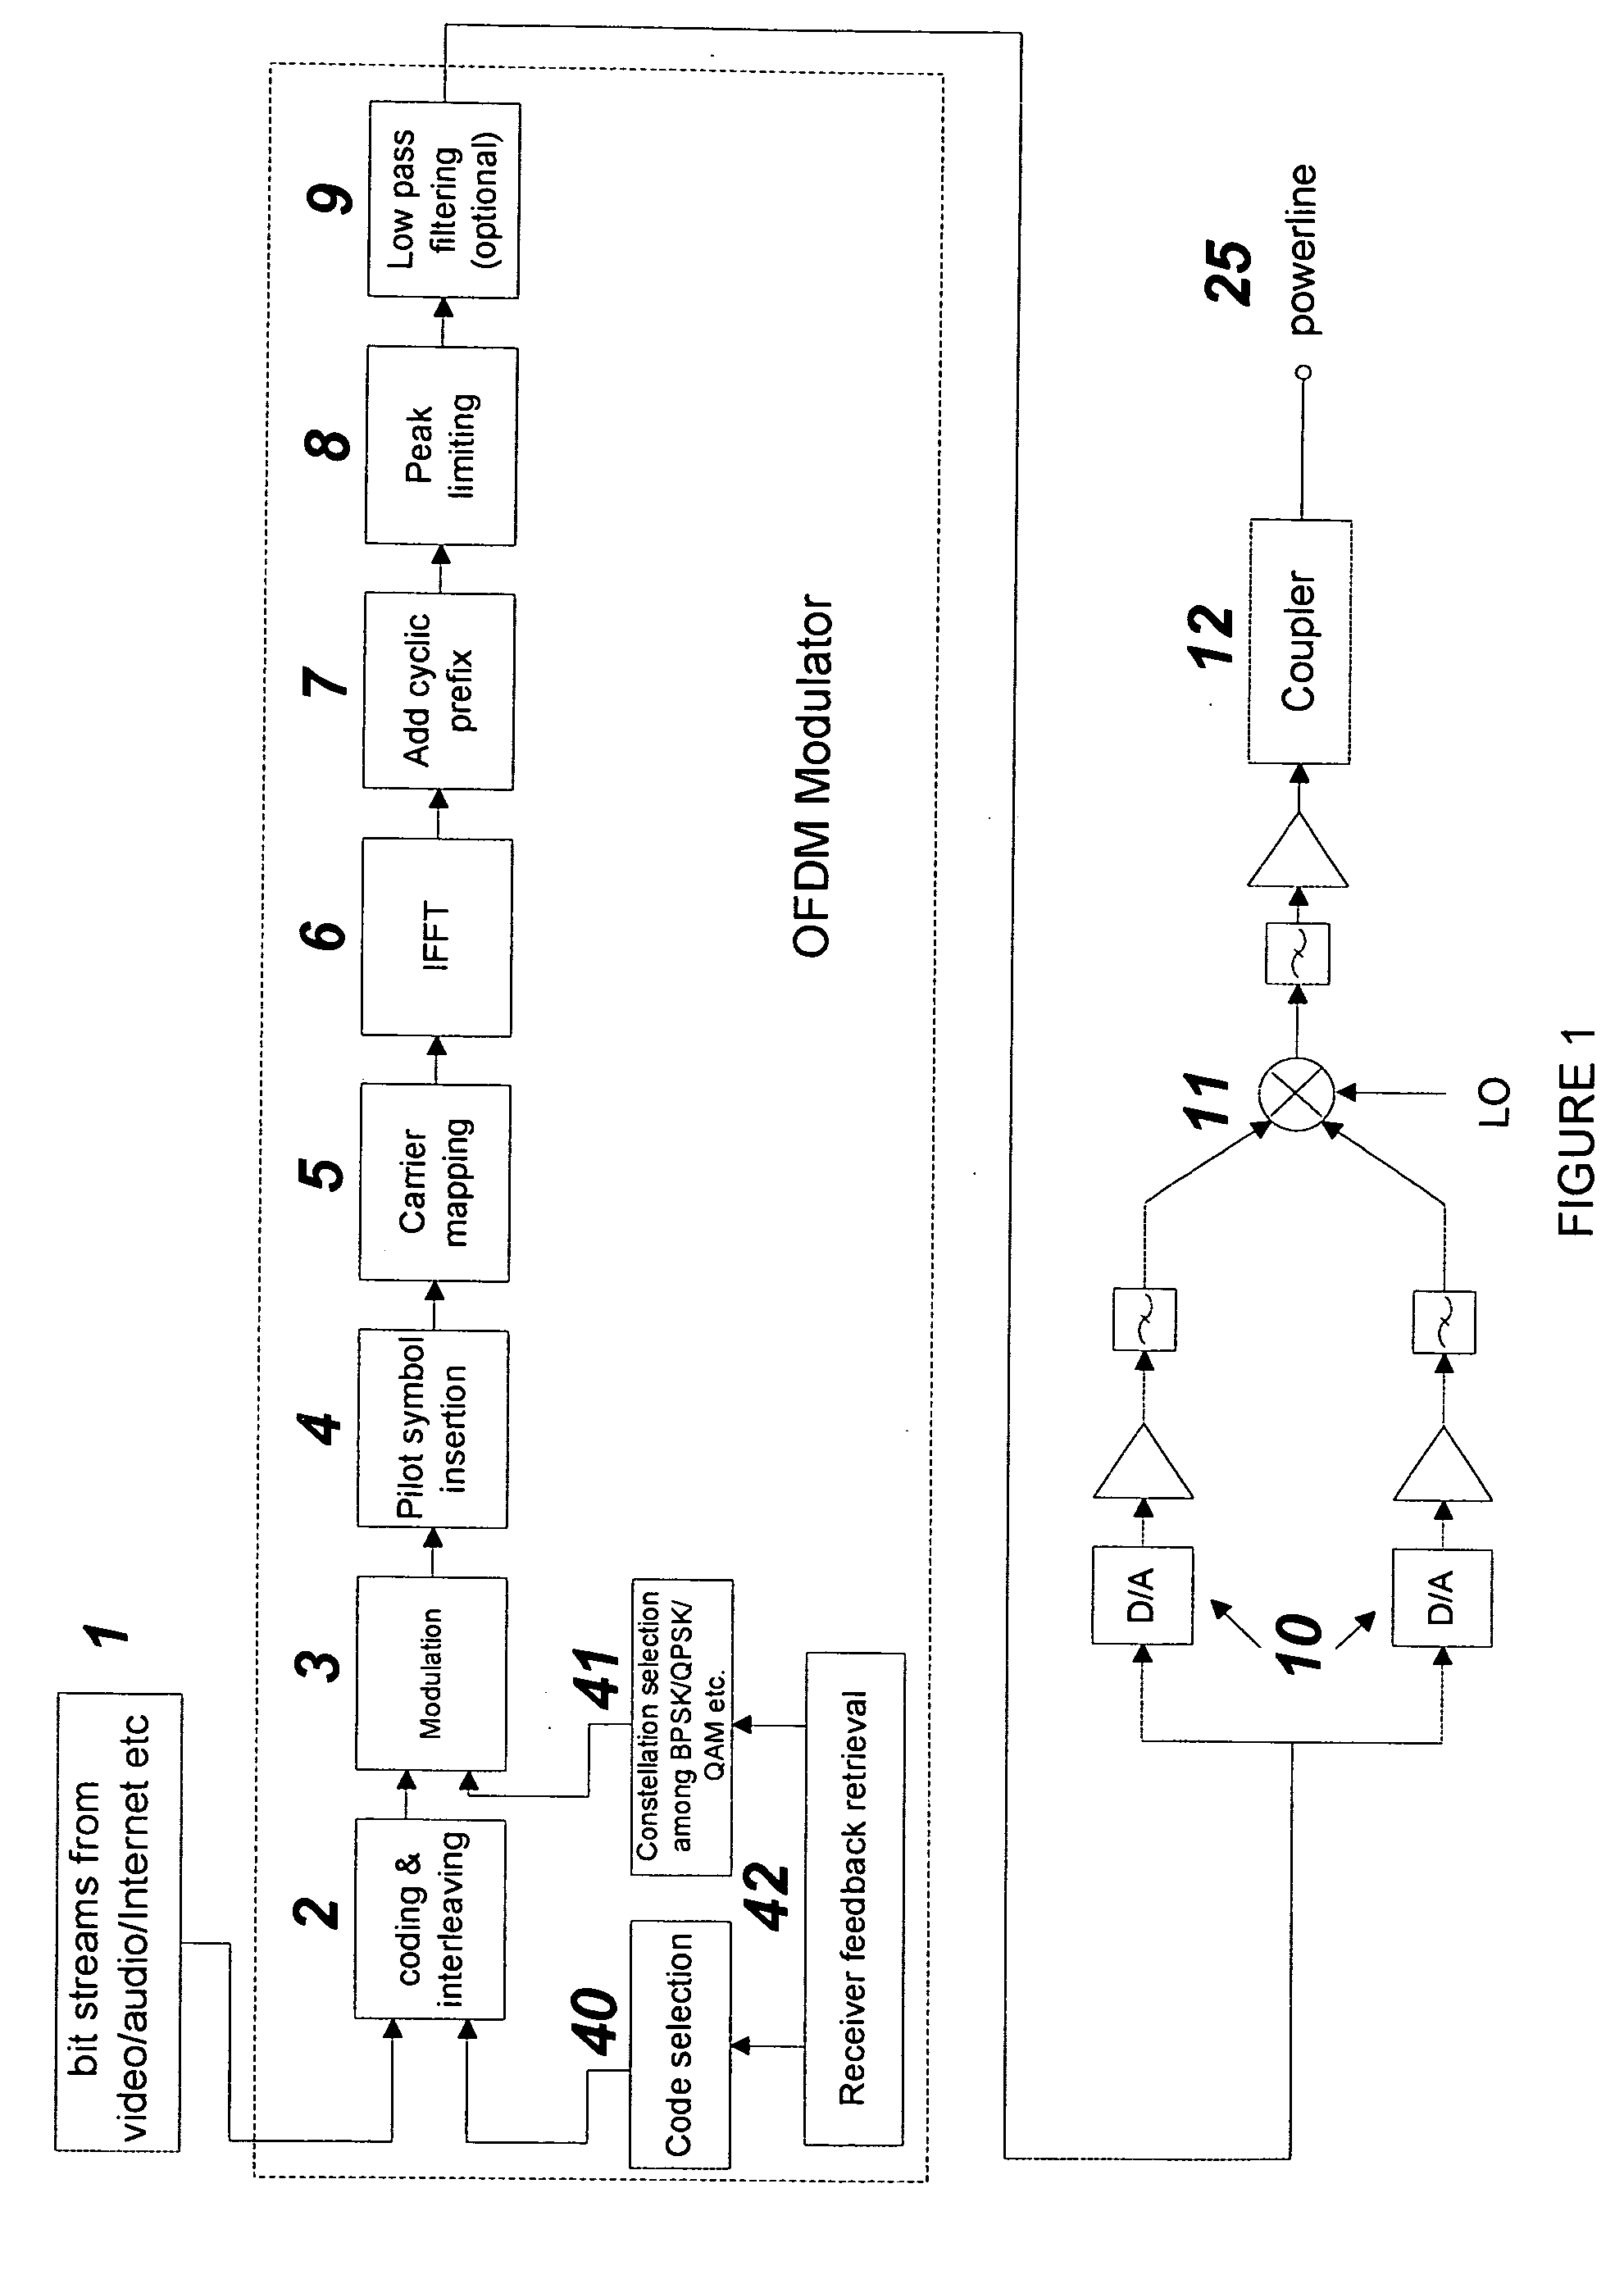 Frequency modulated OFDM over various communication media